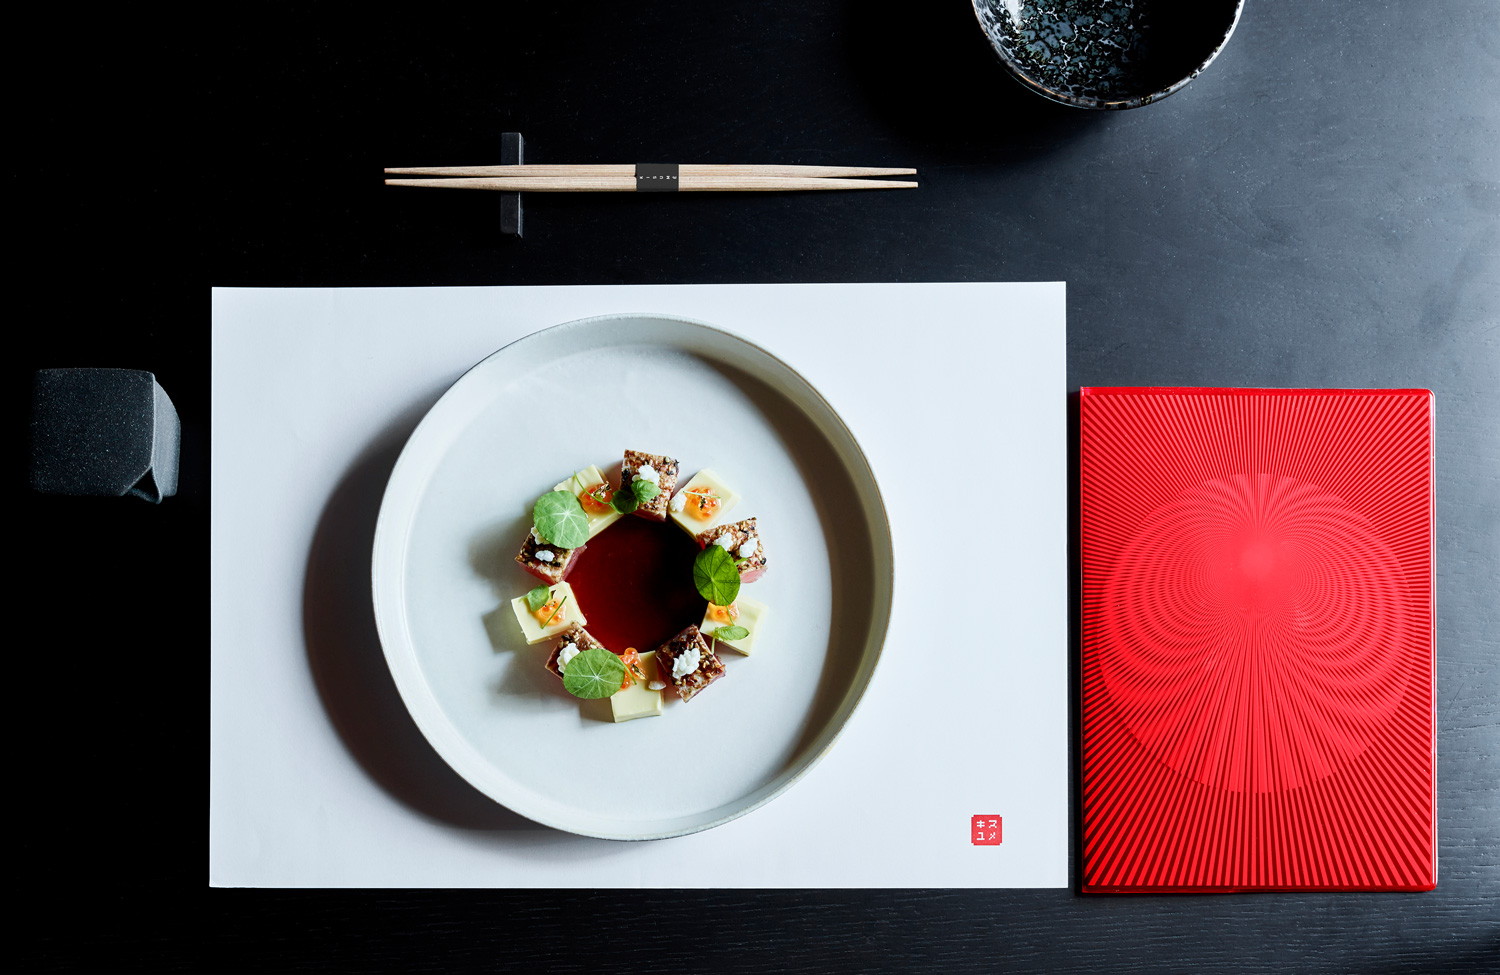 Visual identity and menu designed by Fabio Ongarato Design for Japanese restaurant in Melbourne Kisumé